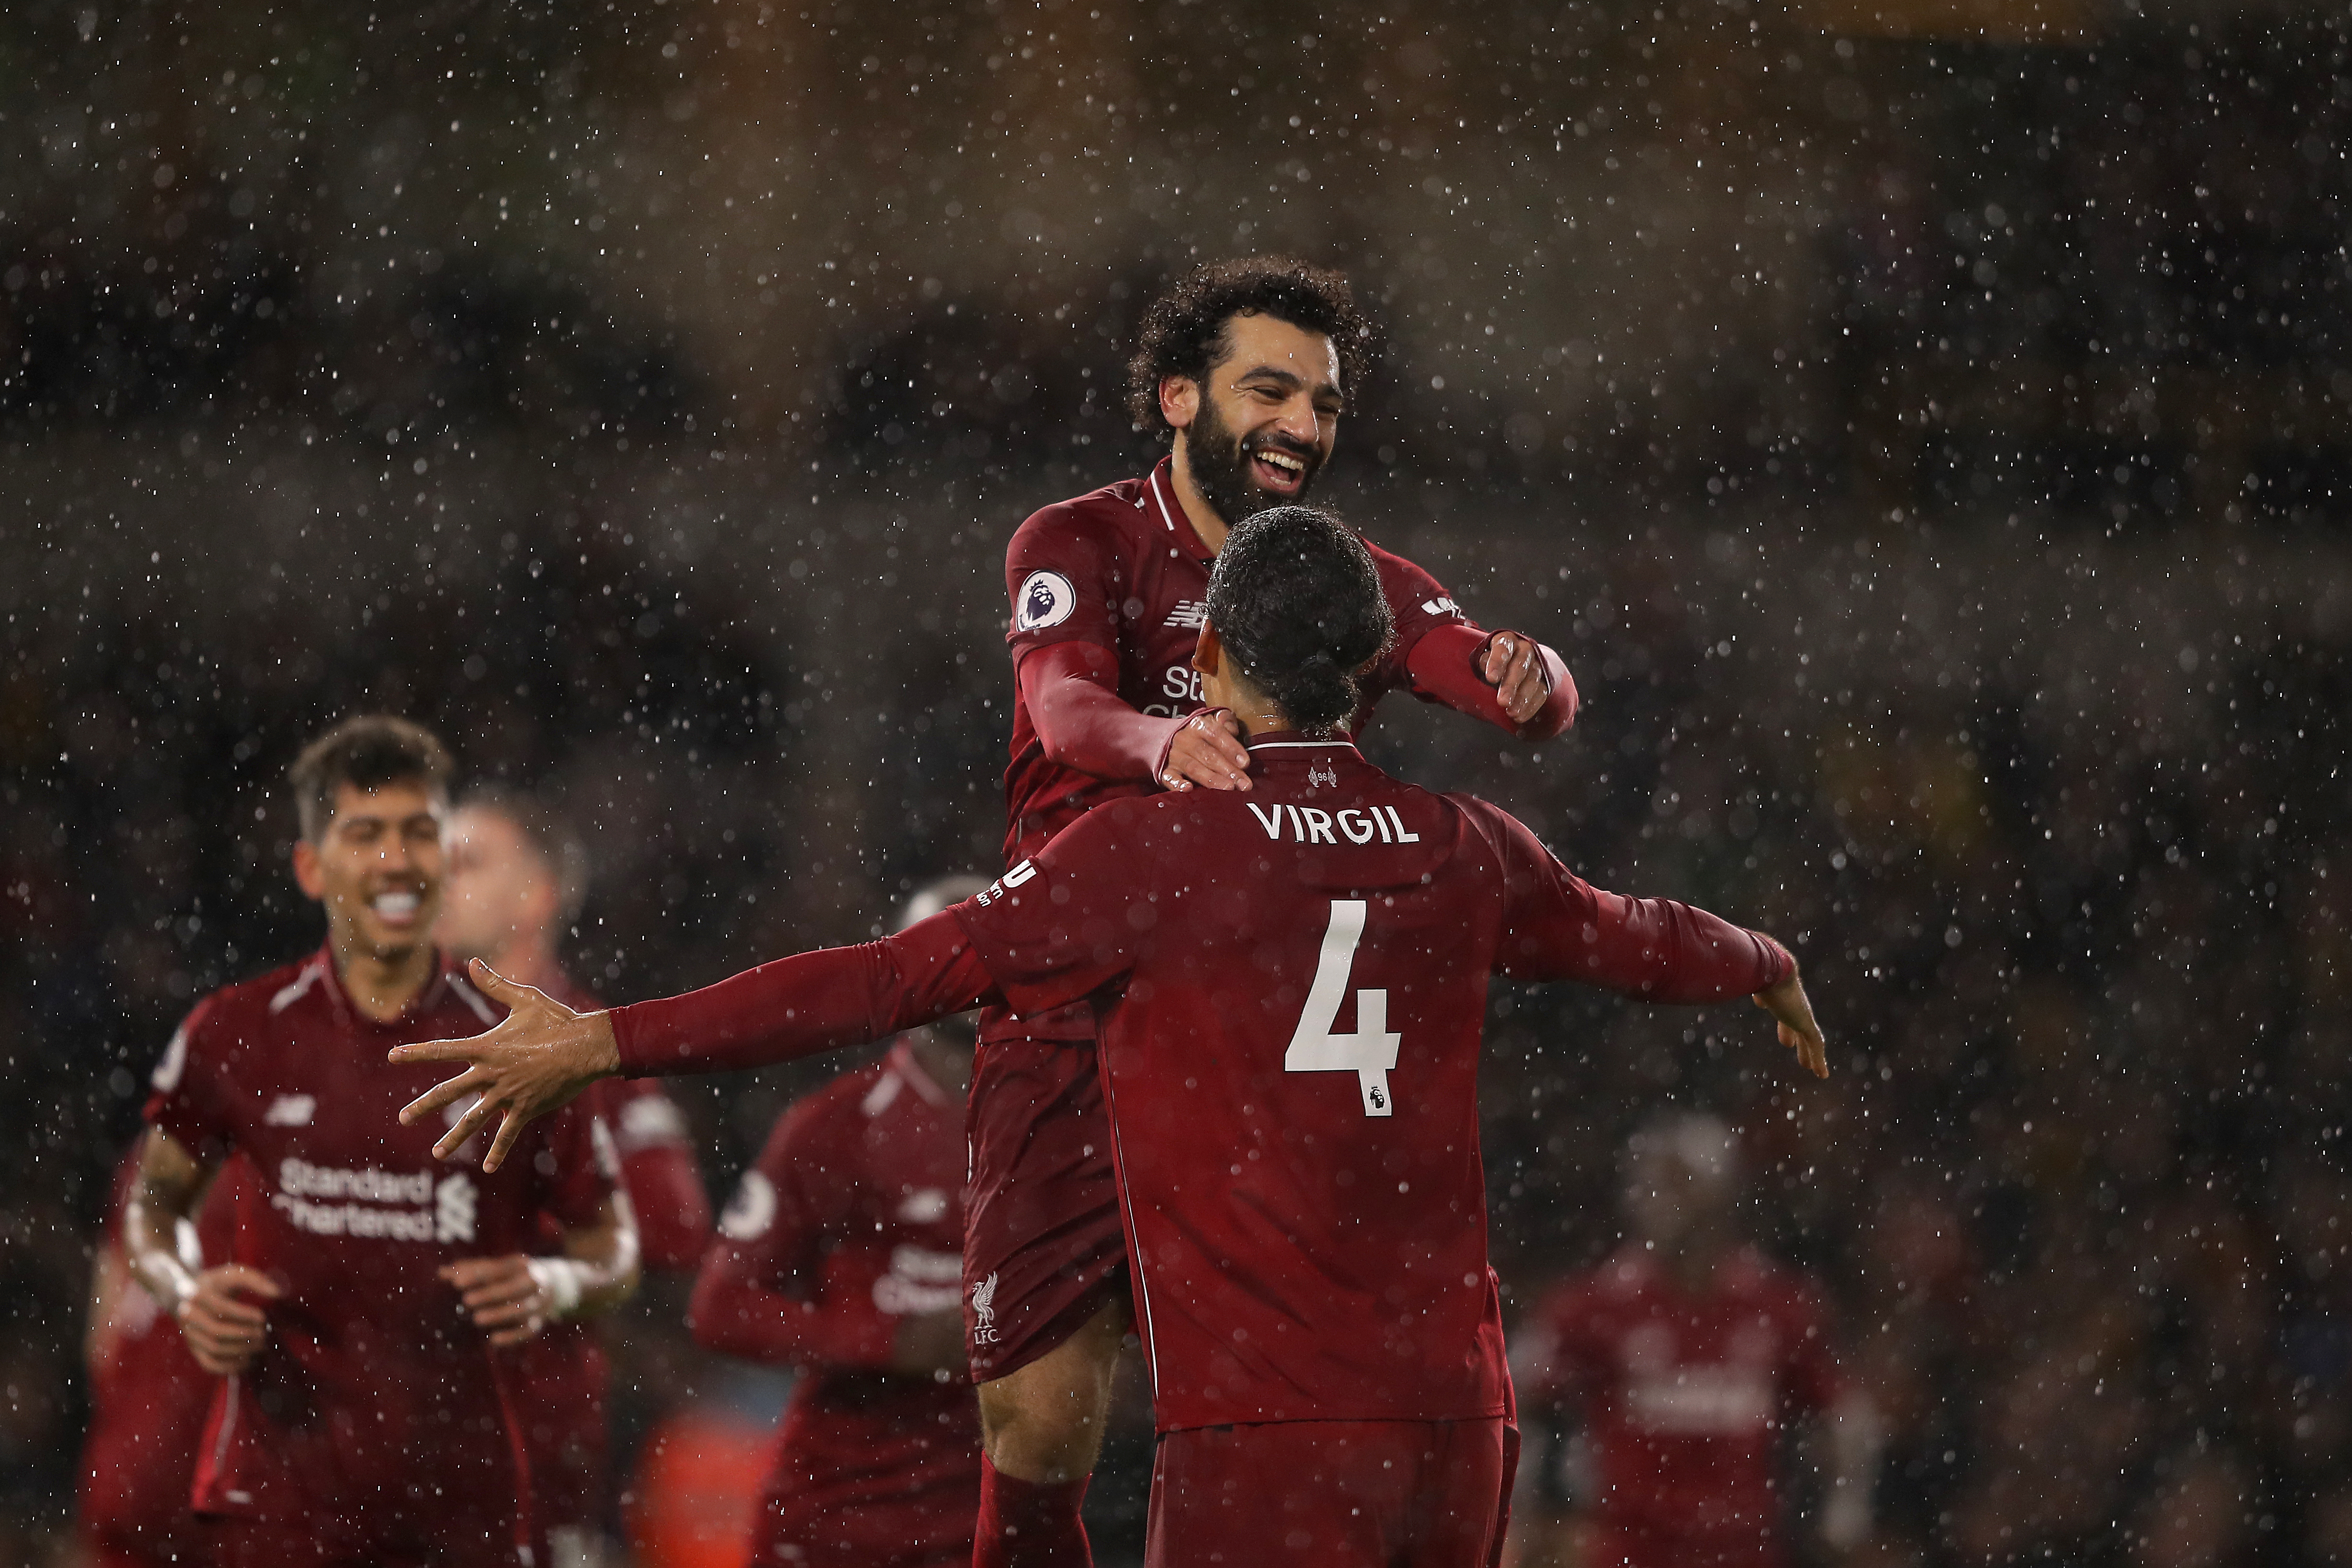 WOLVERHAMPTON, ENGLAND - DECEMBER 21: Mohamed Salah of Liverpool is congratulated by Virgil Van Dijk as he celebrates scoring the first goal during the Premier League match between Wolverhampton Wanderers and Liverpool FC at Molineux on December 21, 2018 in Wolverhampton, United Kingdom. (Photo by Richard Heathcote/Getty Images)